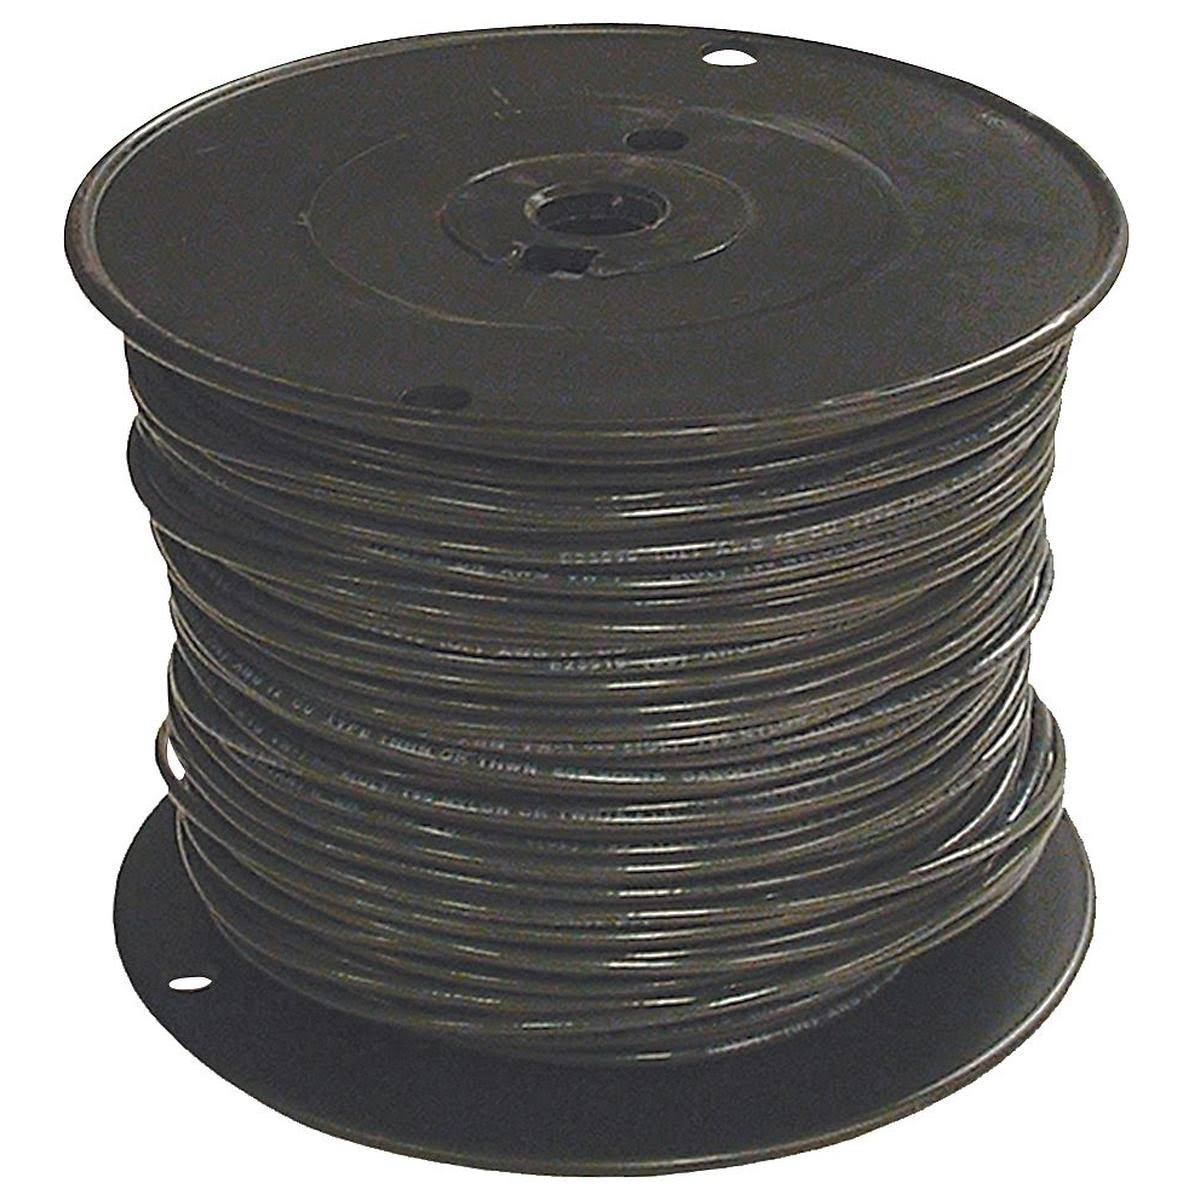 Southwire Stranded Single Building Wire - 12 AWG, 500'